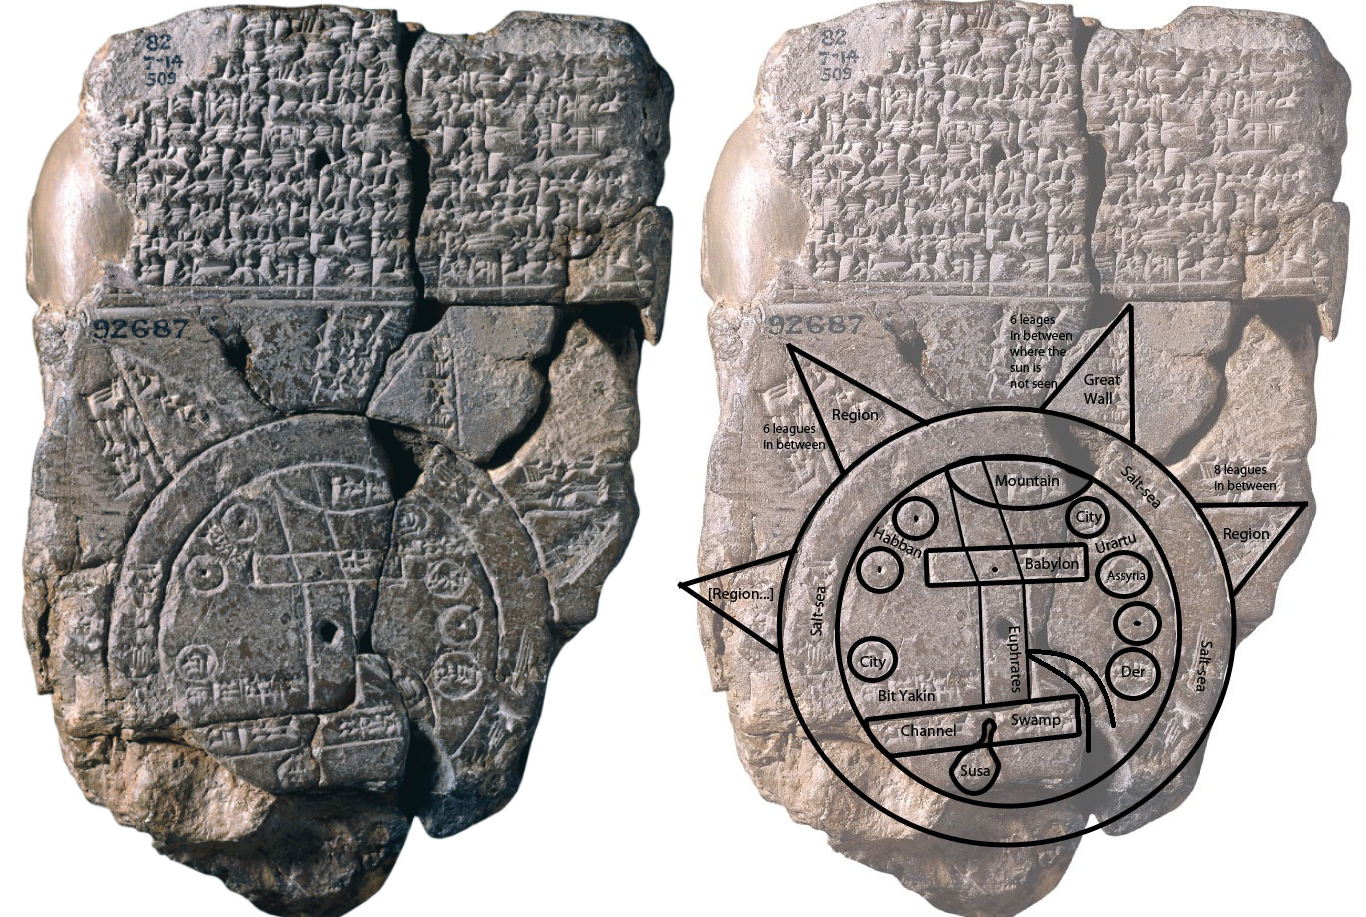 This tablet contains both a cuneiform inscription and a unique map of the Mesopotamian world. Babylon is shown in the centre (the rectangle in the top half of the circle), and Assyria, Elam, and other places are also named. Map of the World, Late Babylonian, c. 500 B.C.E., clay, findspot: Abu Habba, 12.2 x 8.c cm (© Trustees of the British Museum)